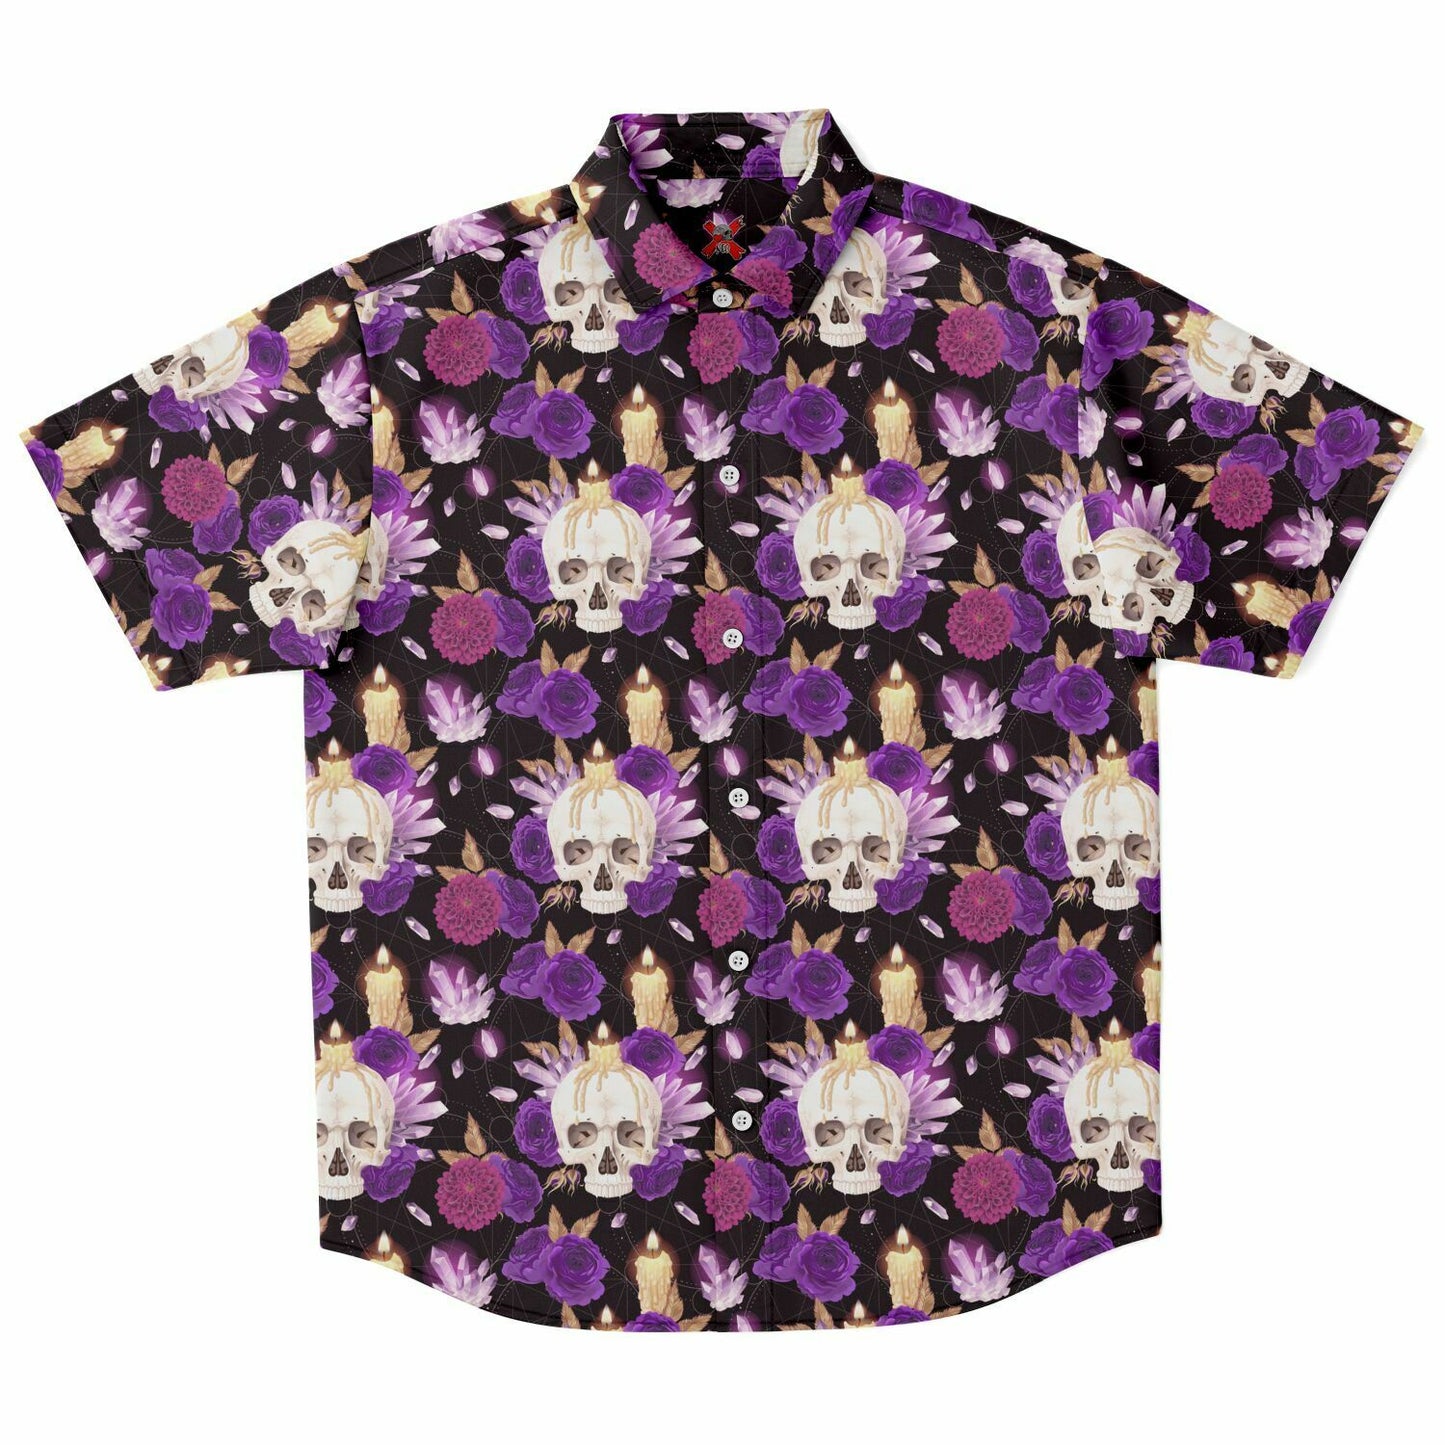 Crystals and roses short sleeve button-up shirt